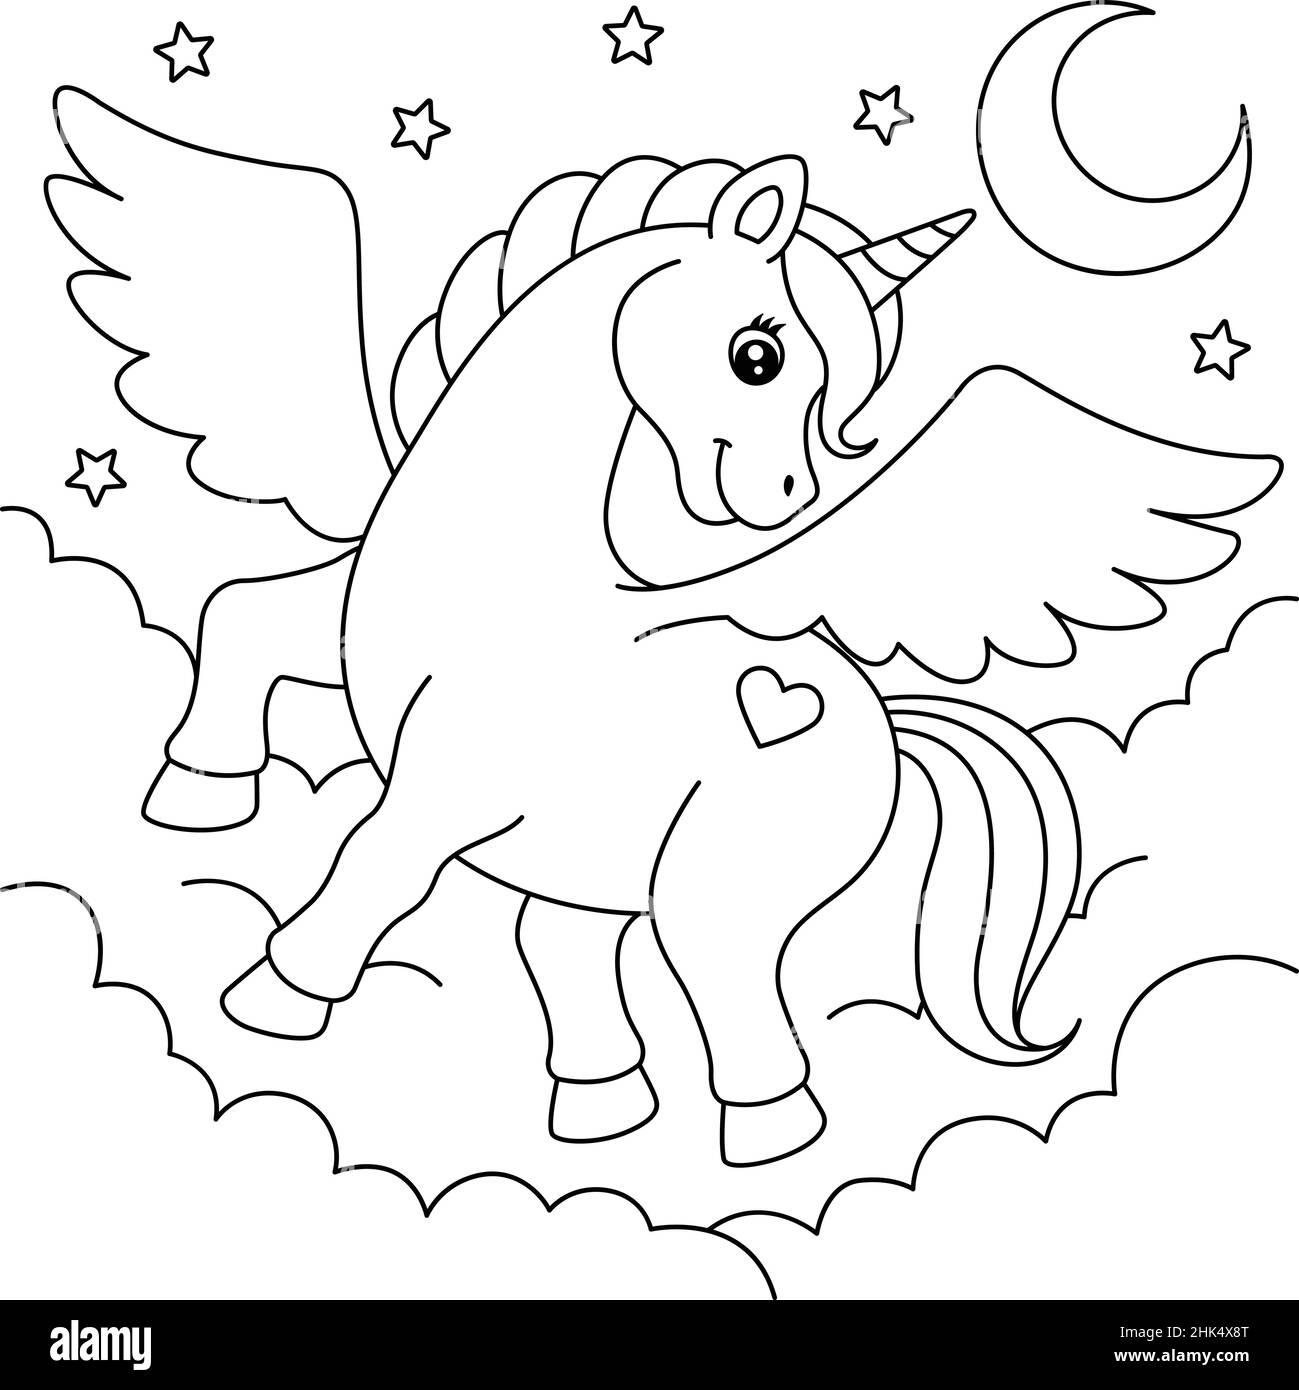 Flying unicorn coloring page for kids stock vector image art